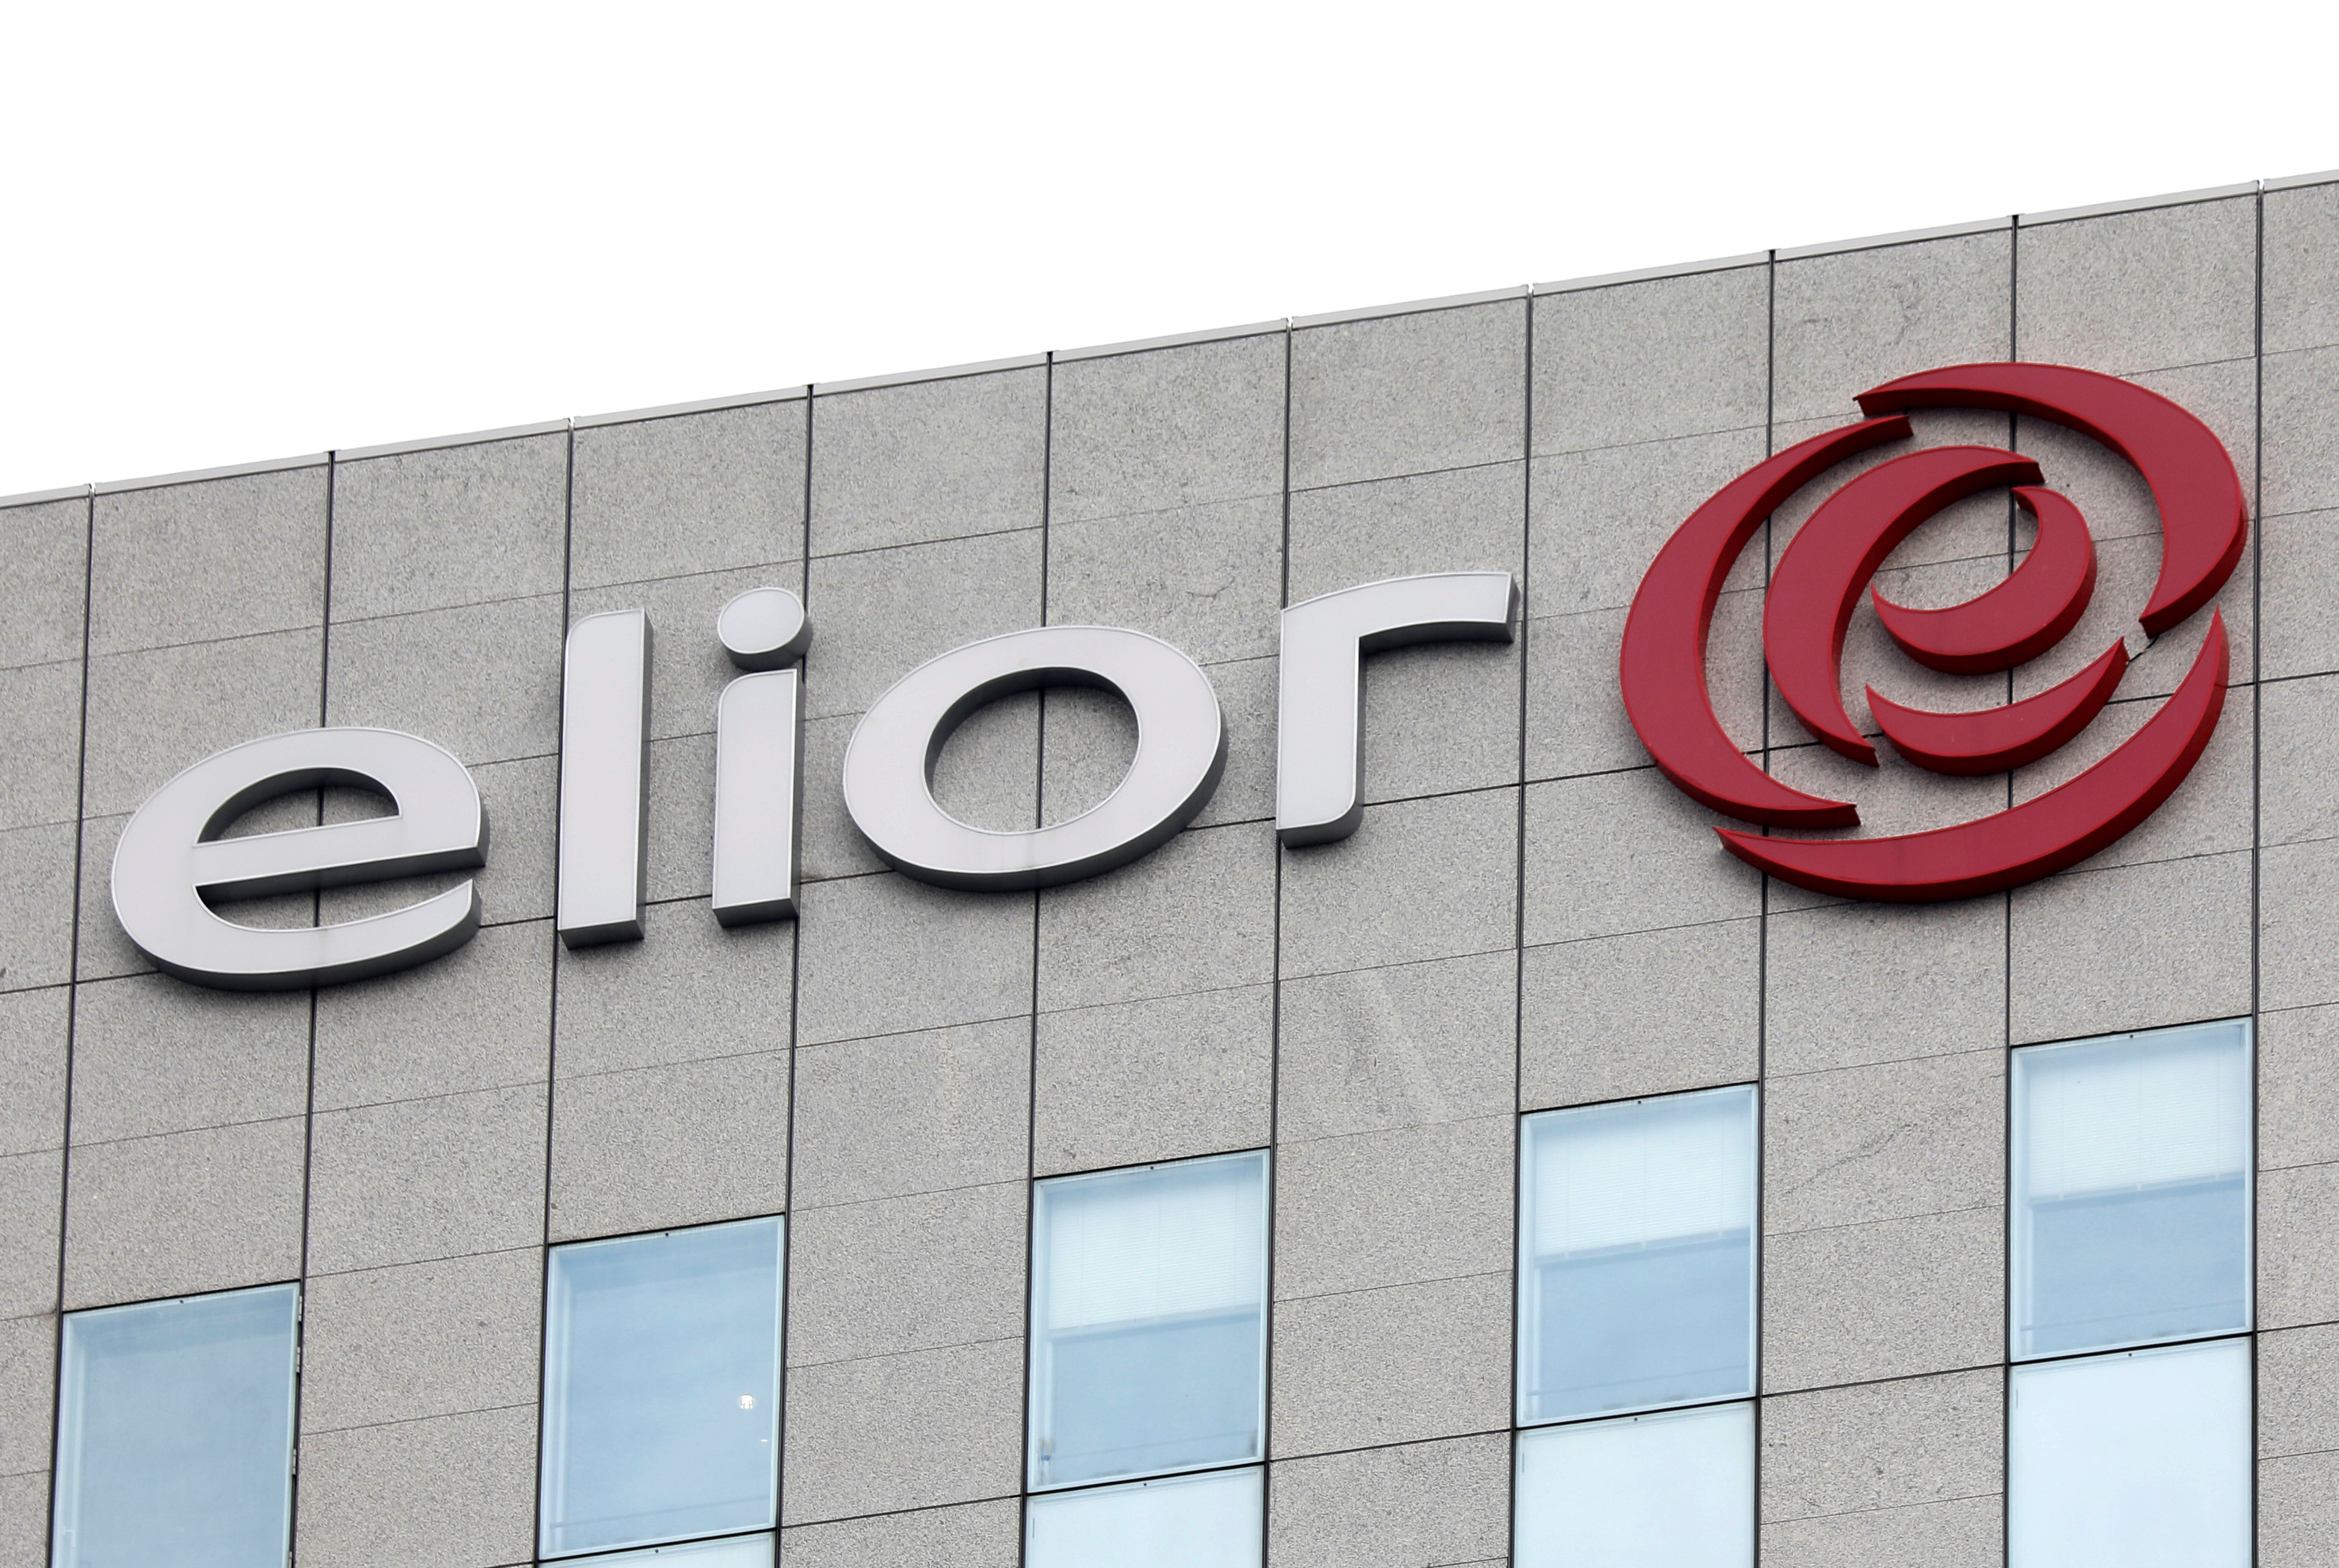 The logo catering group Elior is seen on top of the company's headquarters